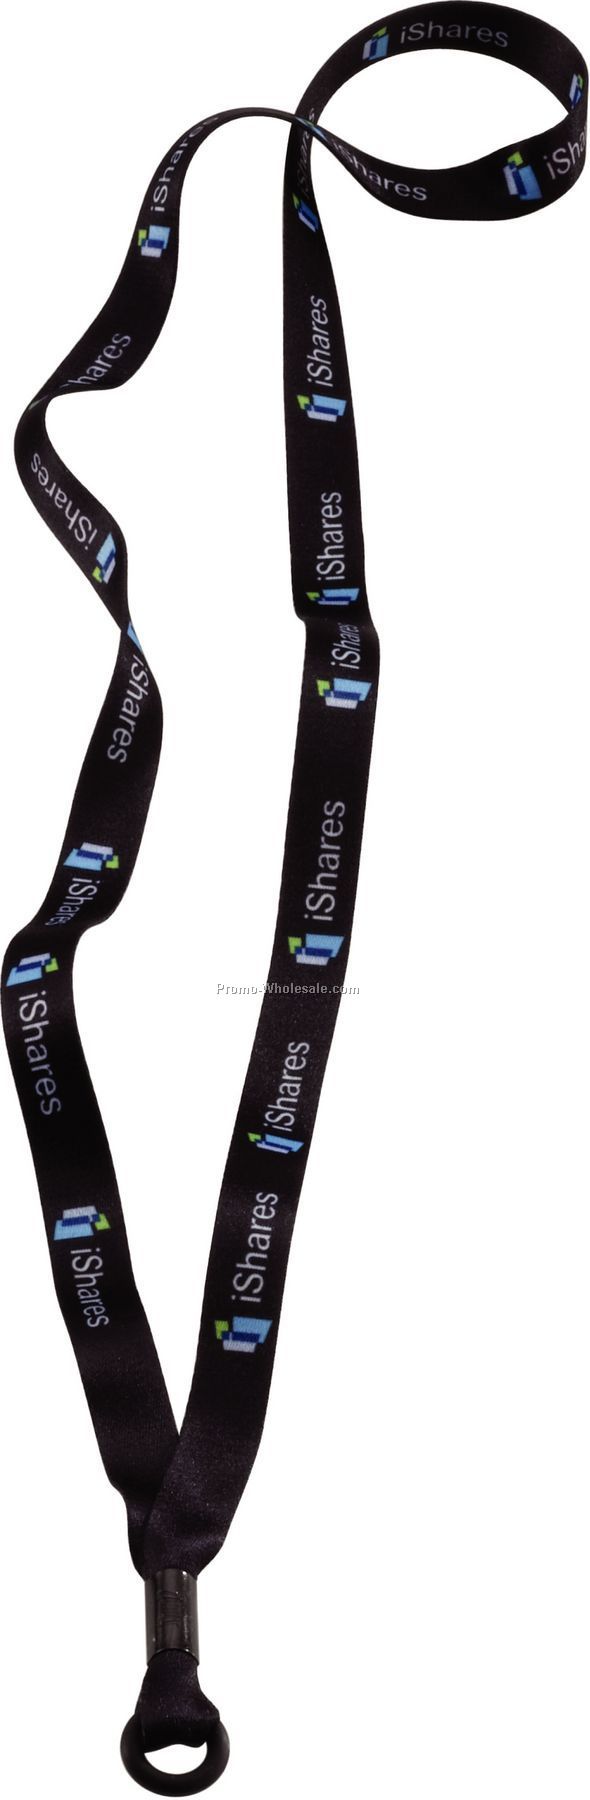 1/2" Recycled Dye Sublimated Lanyard With Metal Crimp & Rubber O-ring